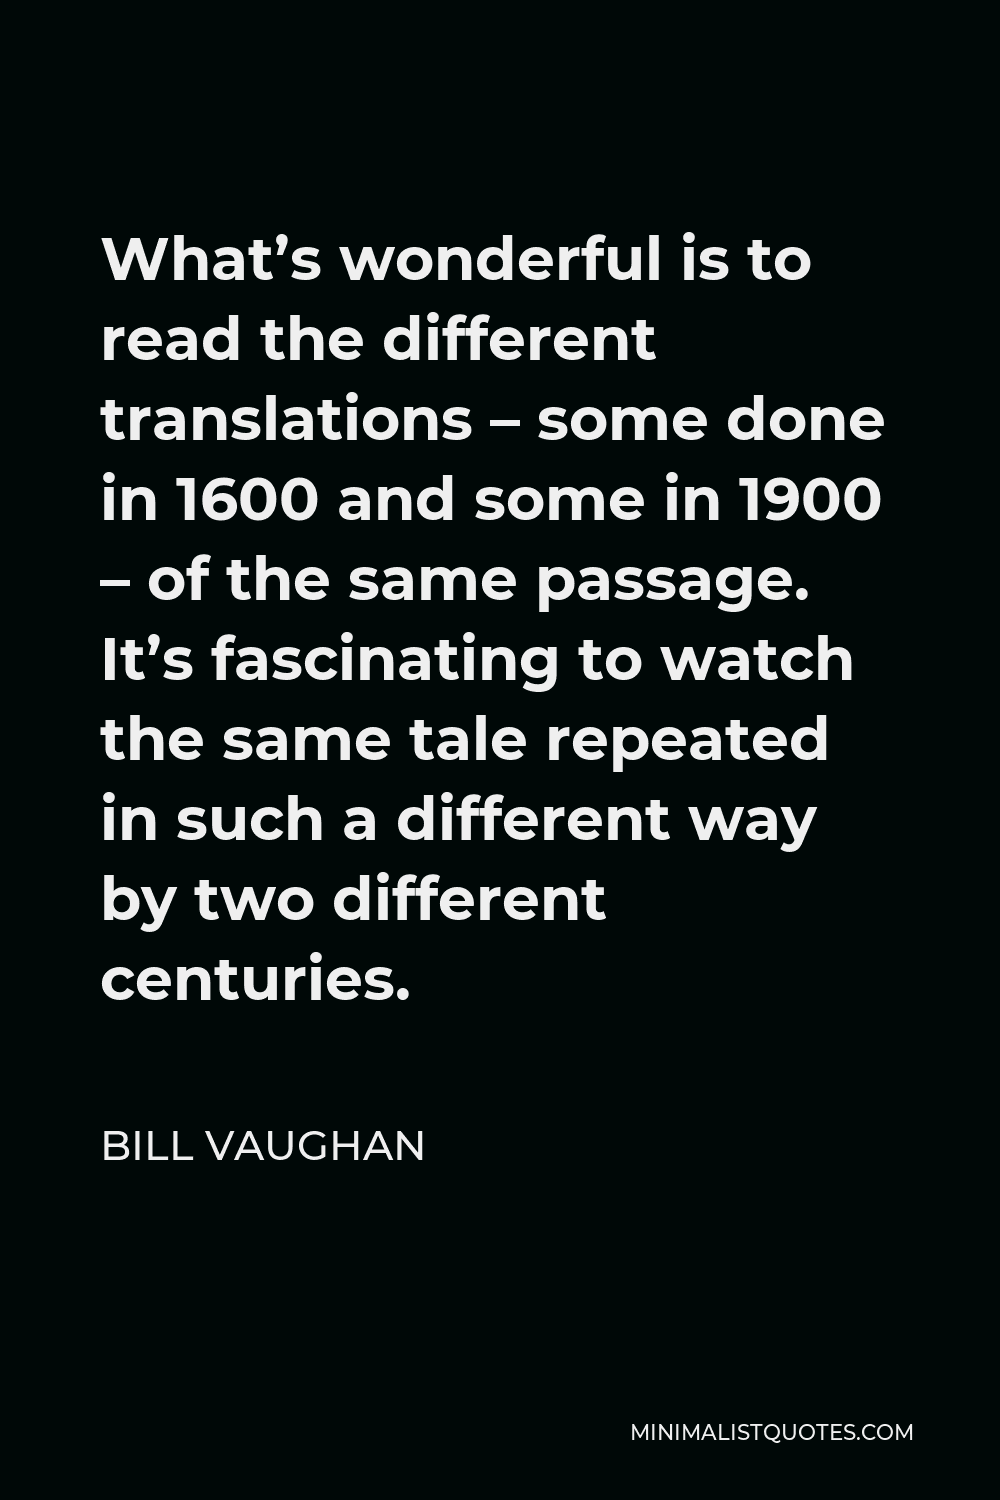 Bill Vaughan Quote - What’s wonderful is to read the different translations – some done in 1600 and some in 1900 – of the same passage. It’s fascinating to watch the same tale repeated in such a different way by two different centuries.